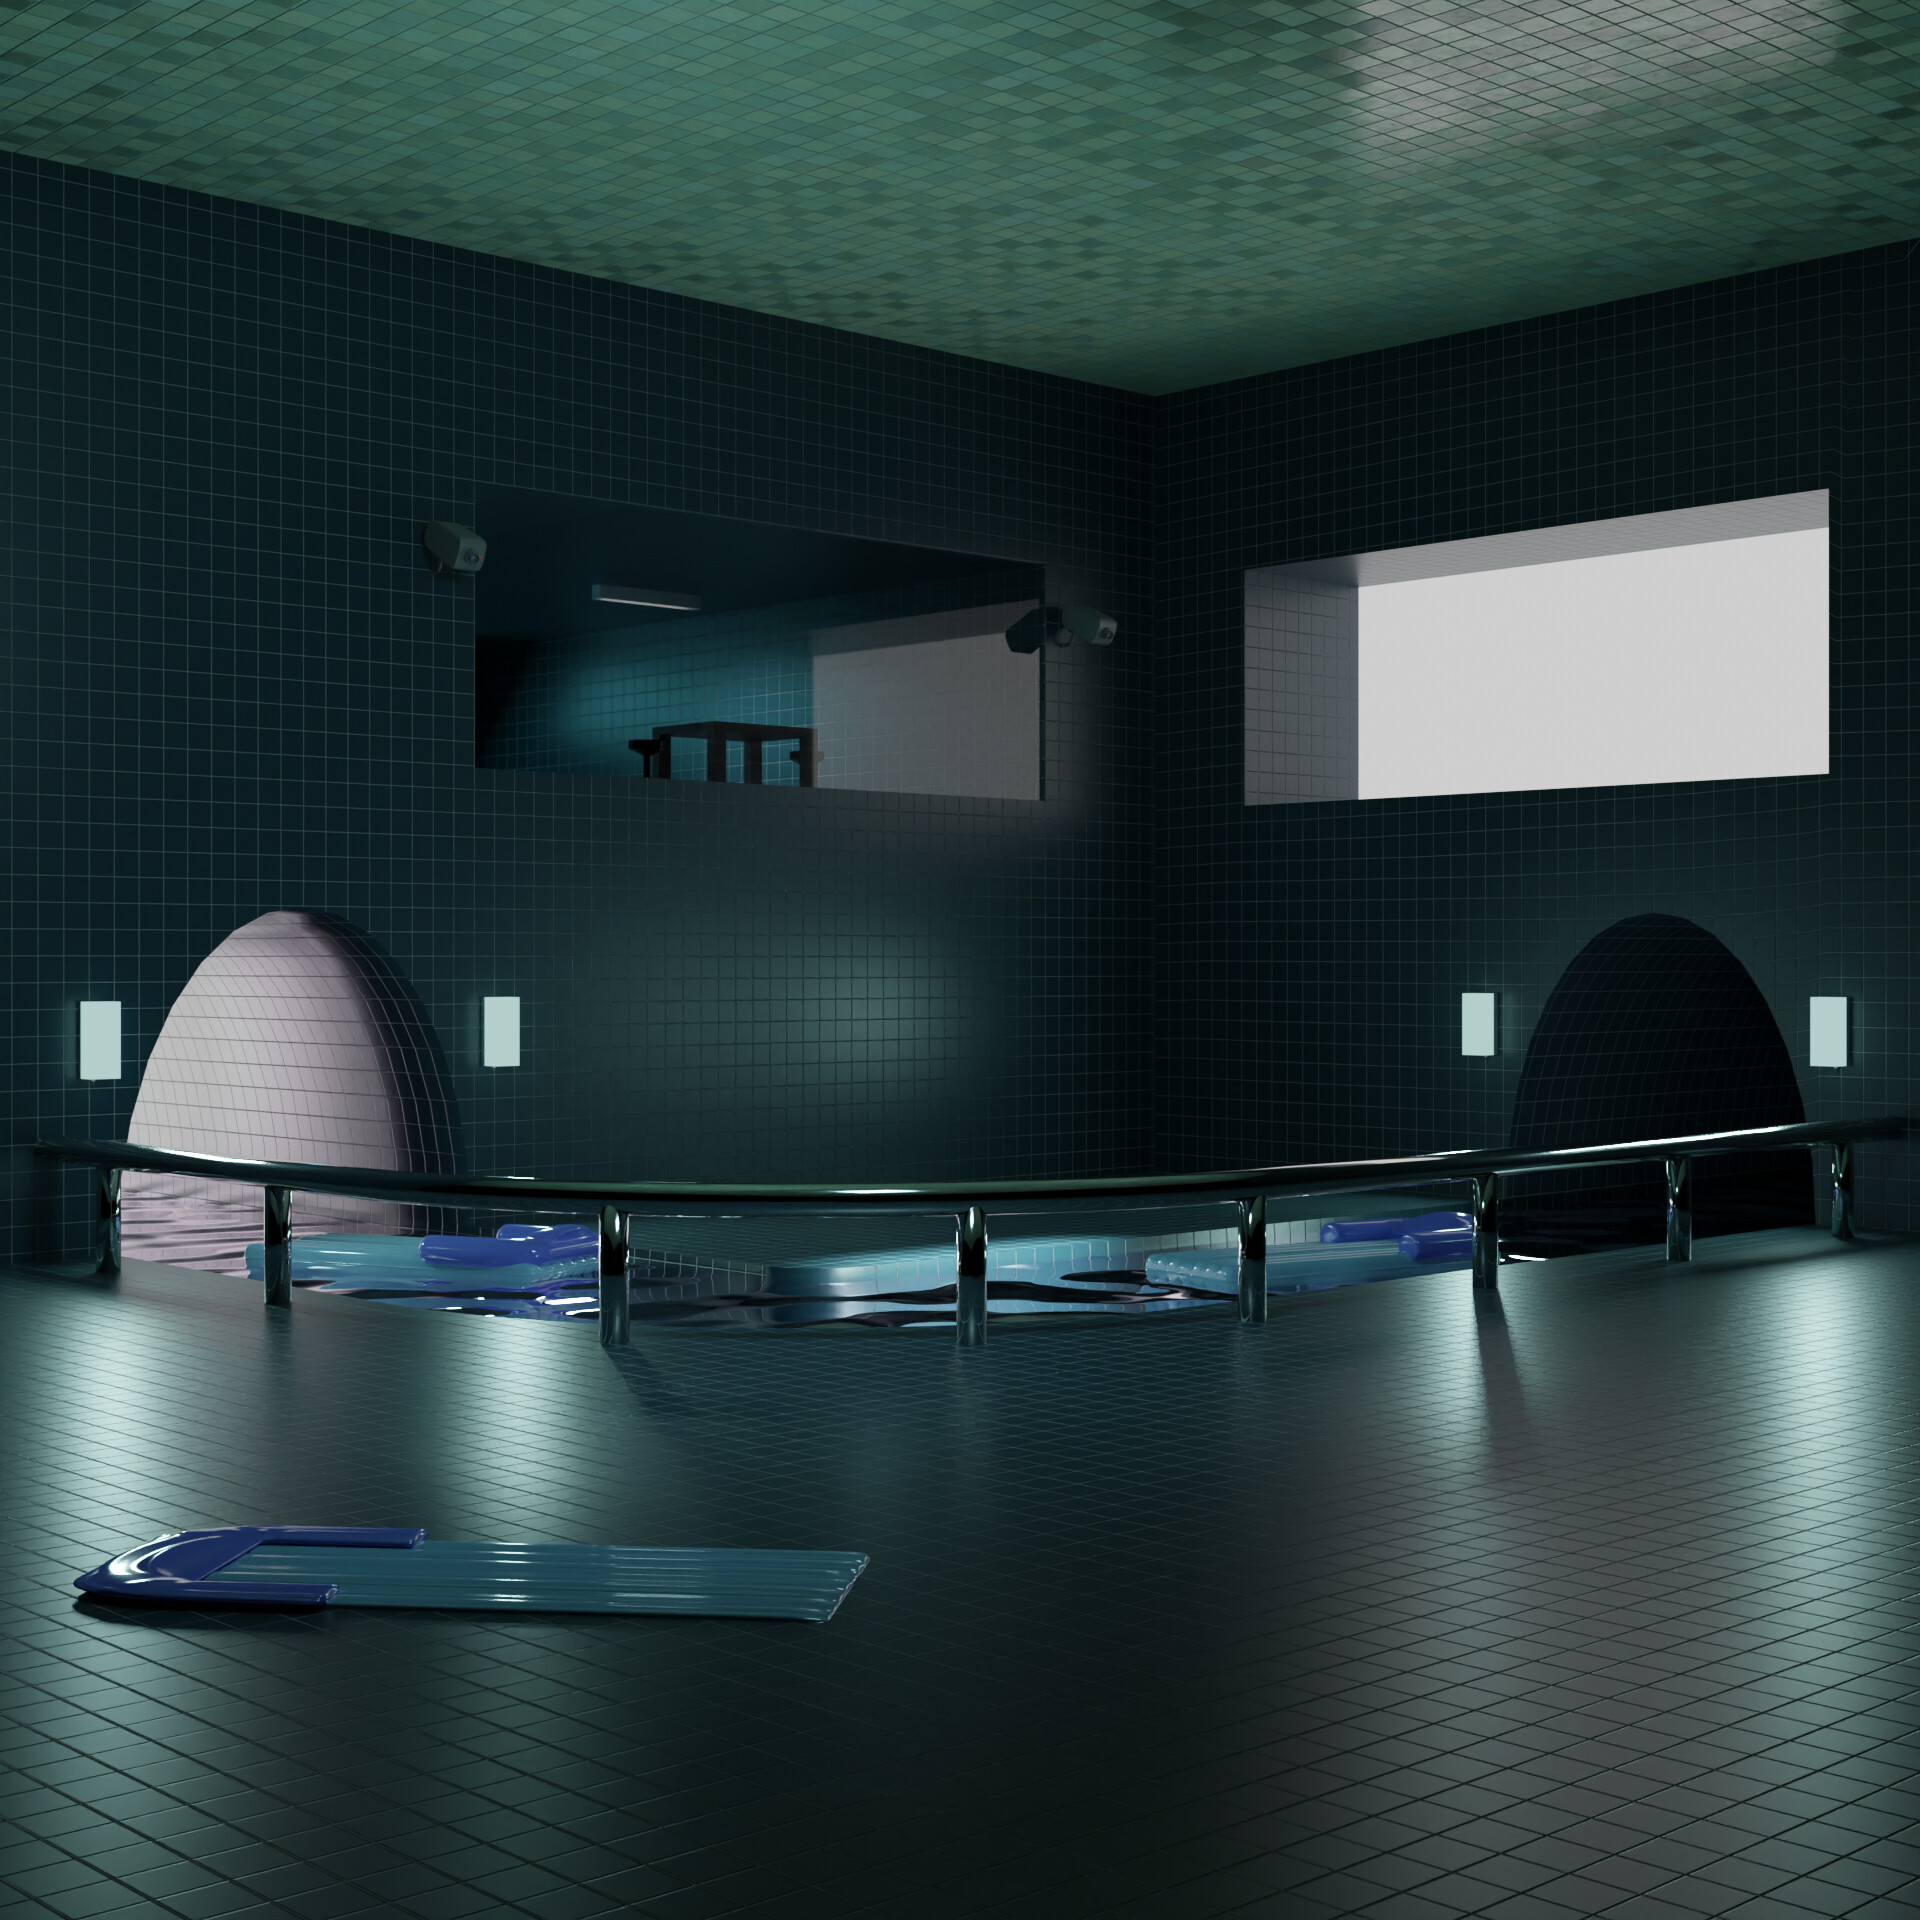 Pool Rooms - Courtyard video - Backrooms: The Project - IndieDB